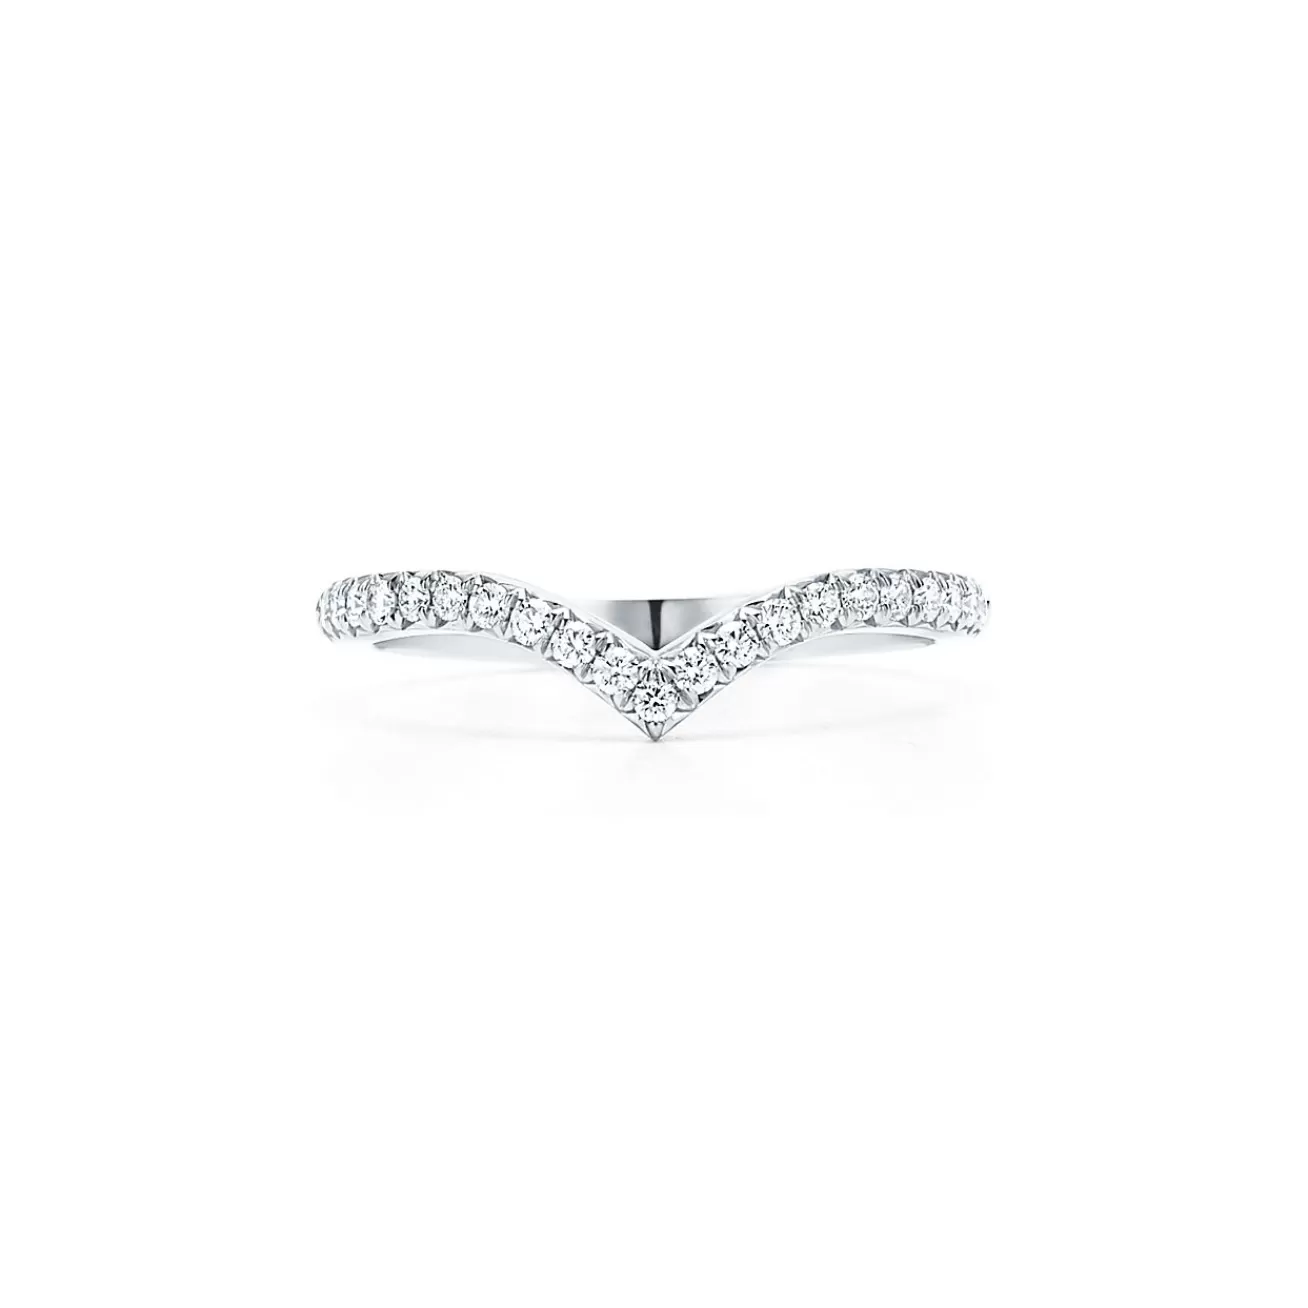 Tiffany & Co. Tiffany Soleste V ring in platinum with diamonds. | ^Women Rings | Gifts for Her